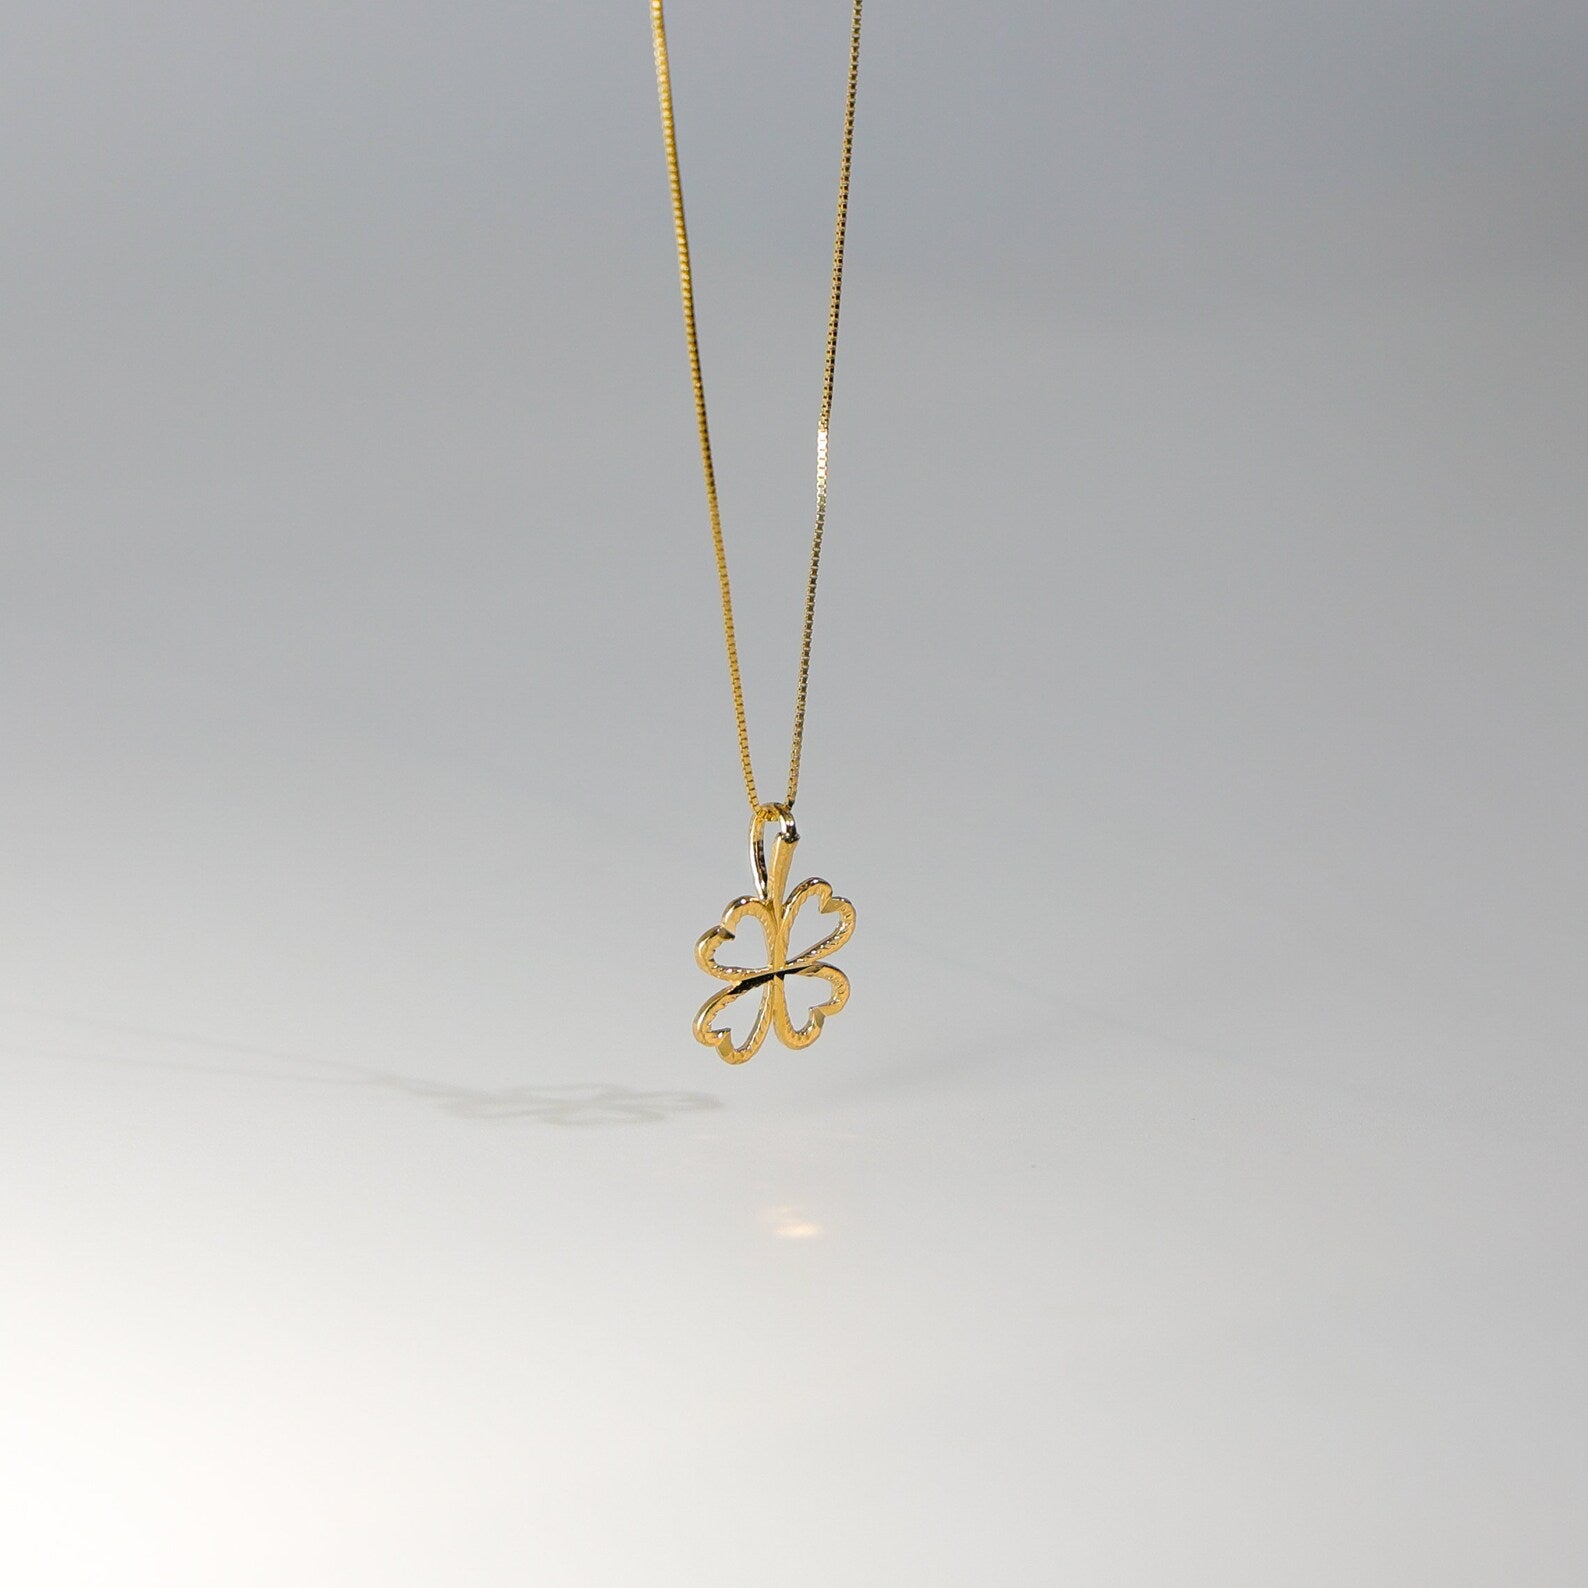 Gold Four Heart Clover Pendant Model-1934 - Charlie & Co. Jewelry